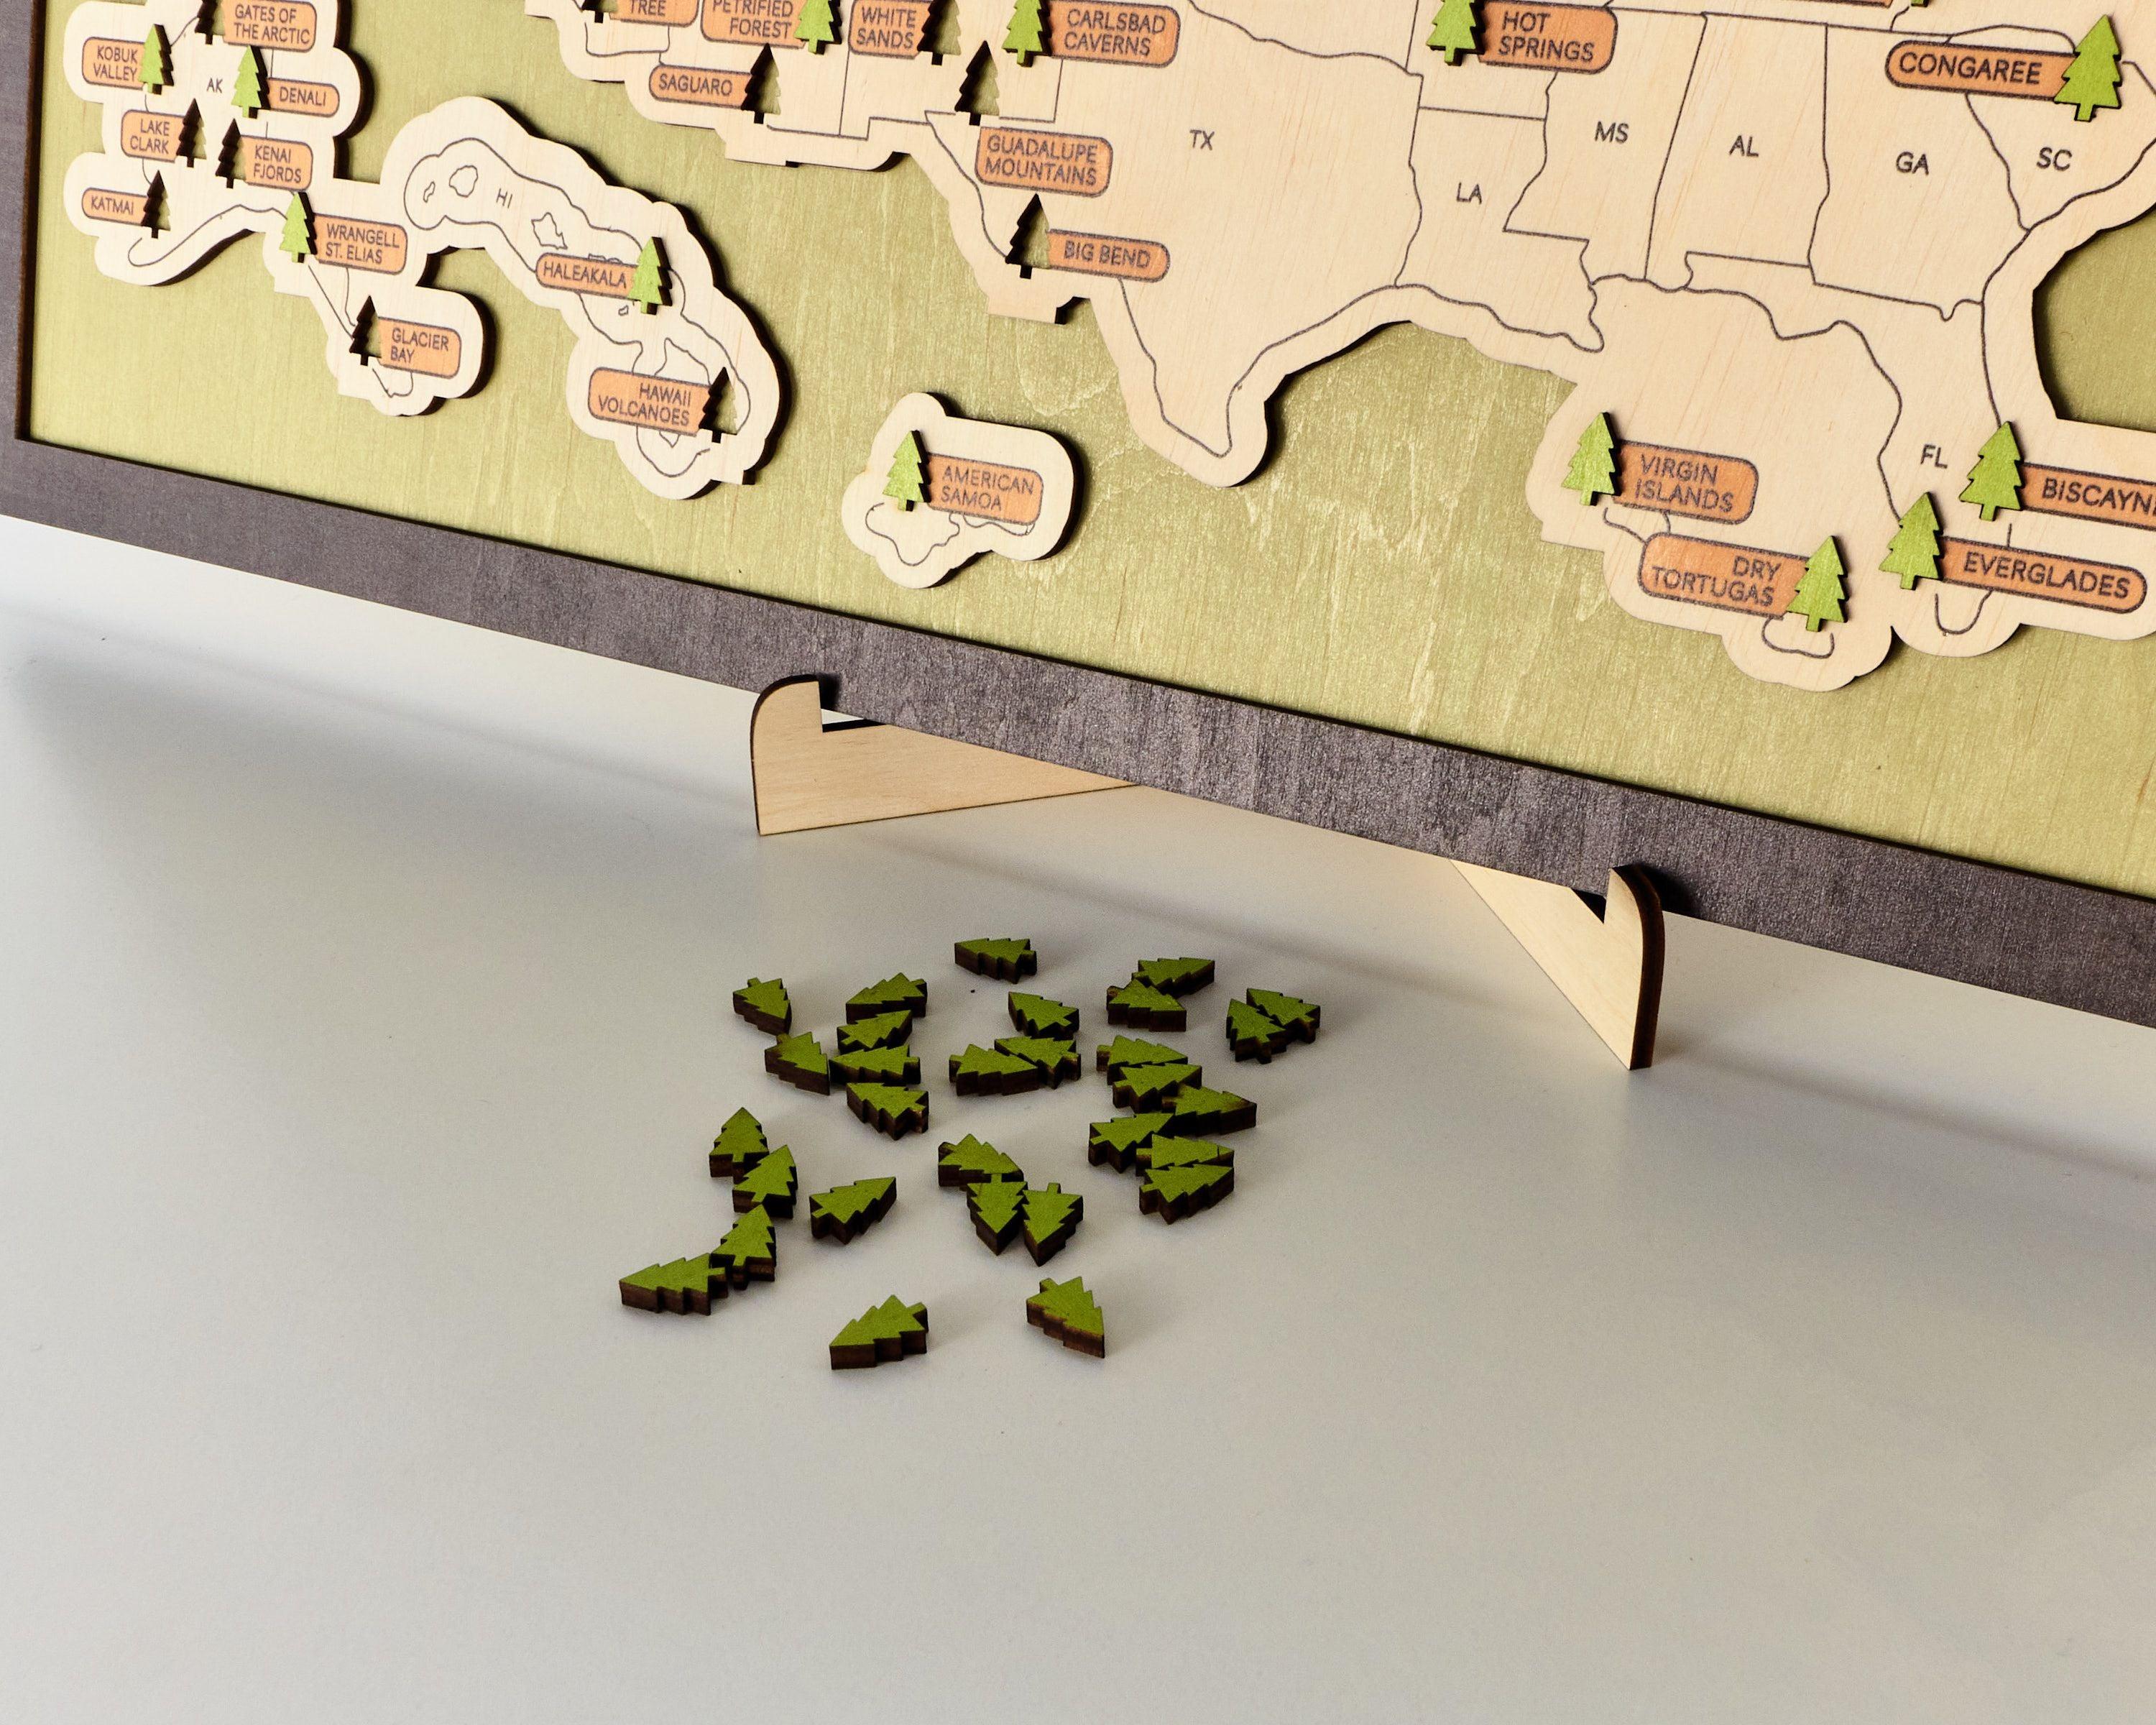 US Wooden National Parks Travel Map With Trees To Record Park Visits (Green) - Lemap